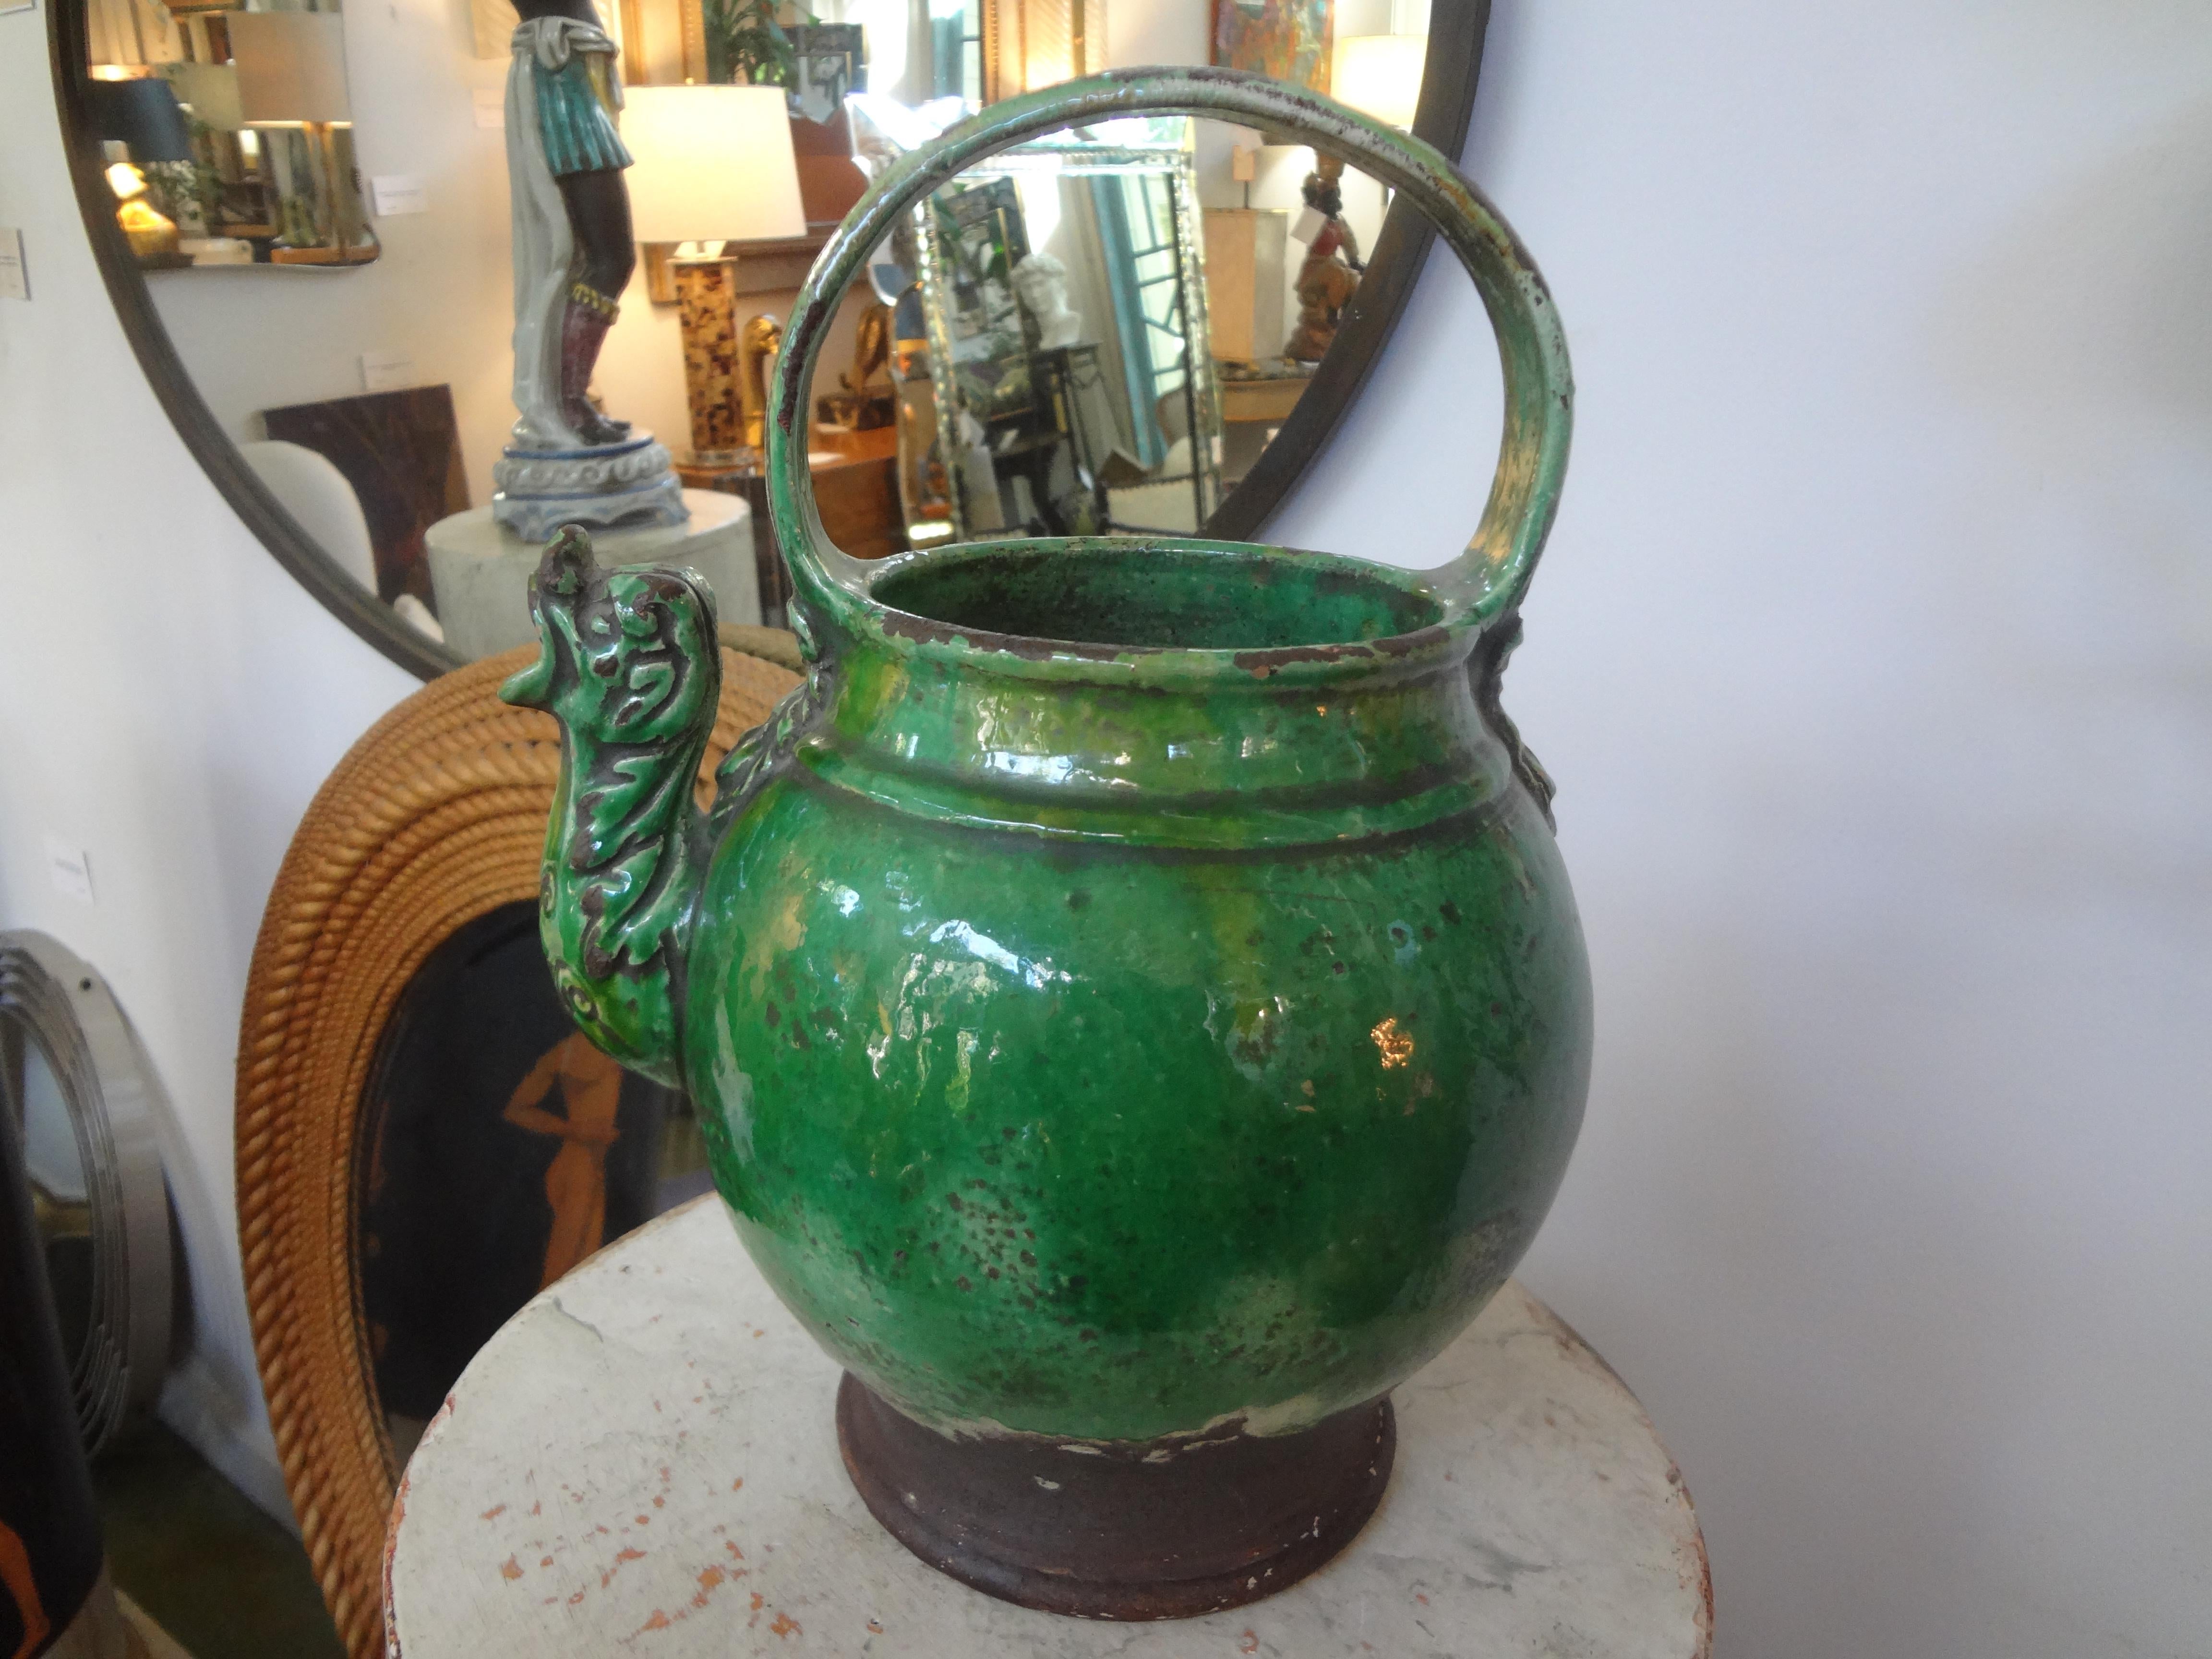 19th century French glazed terracotta vessel or pitcher.
A 19th century French green glazed terracotta pottery vessel or pitcher. This unusual vessel has a dragon spout and mask decoration. This vessel was used for milk or as a vinegar pot